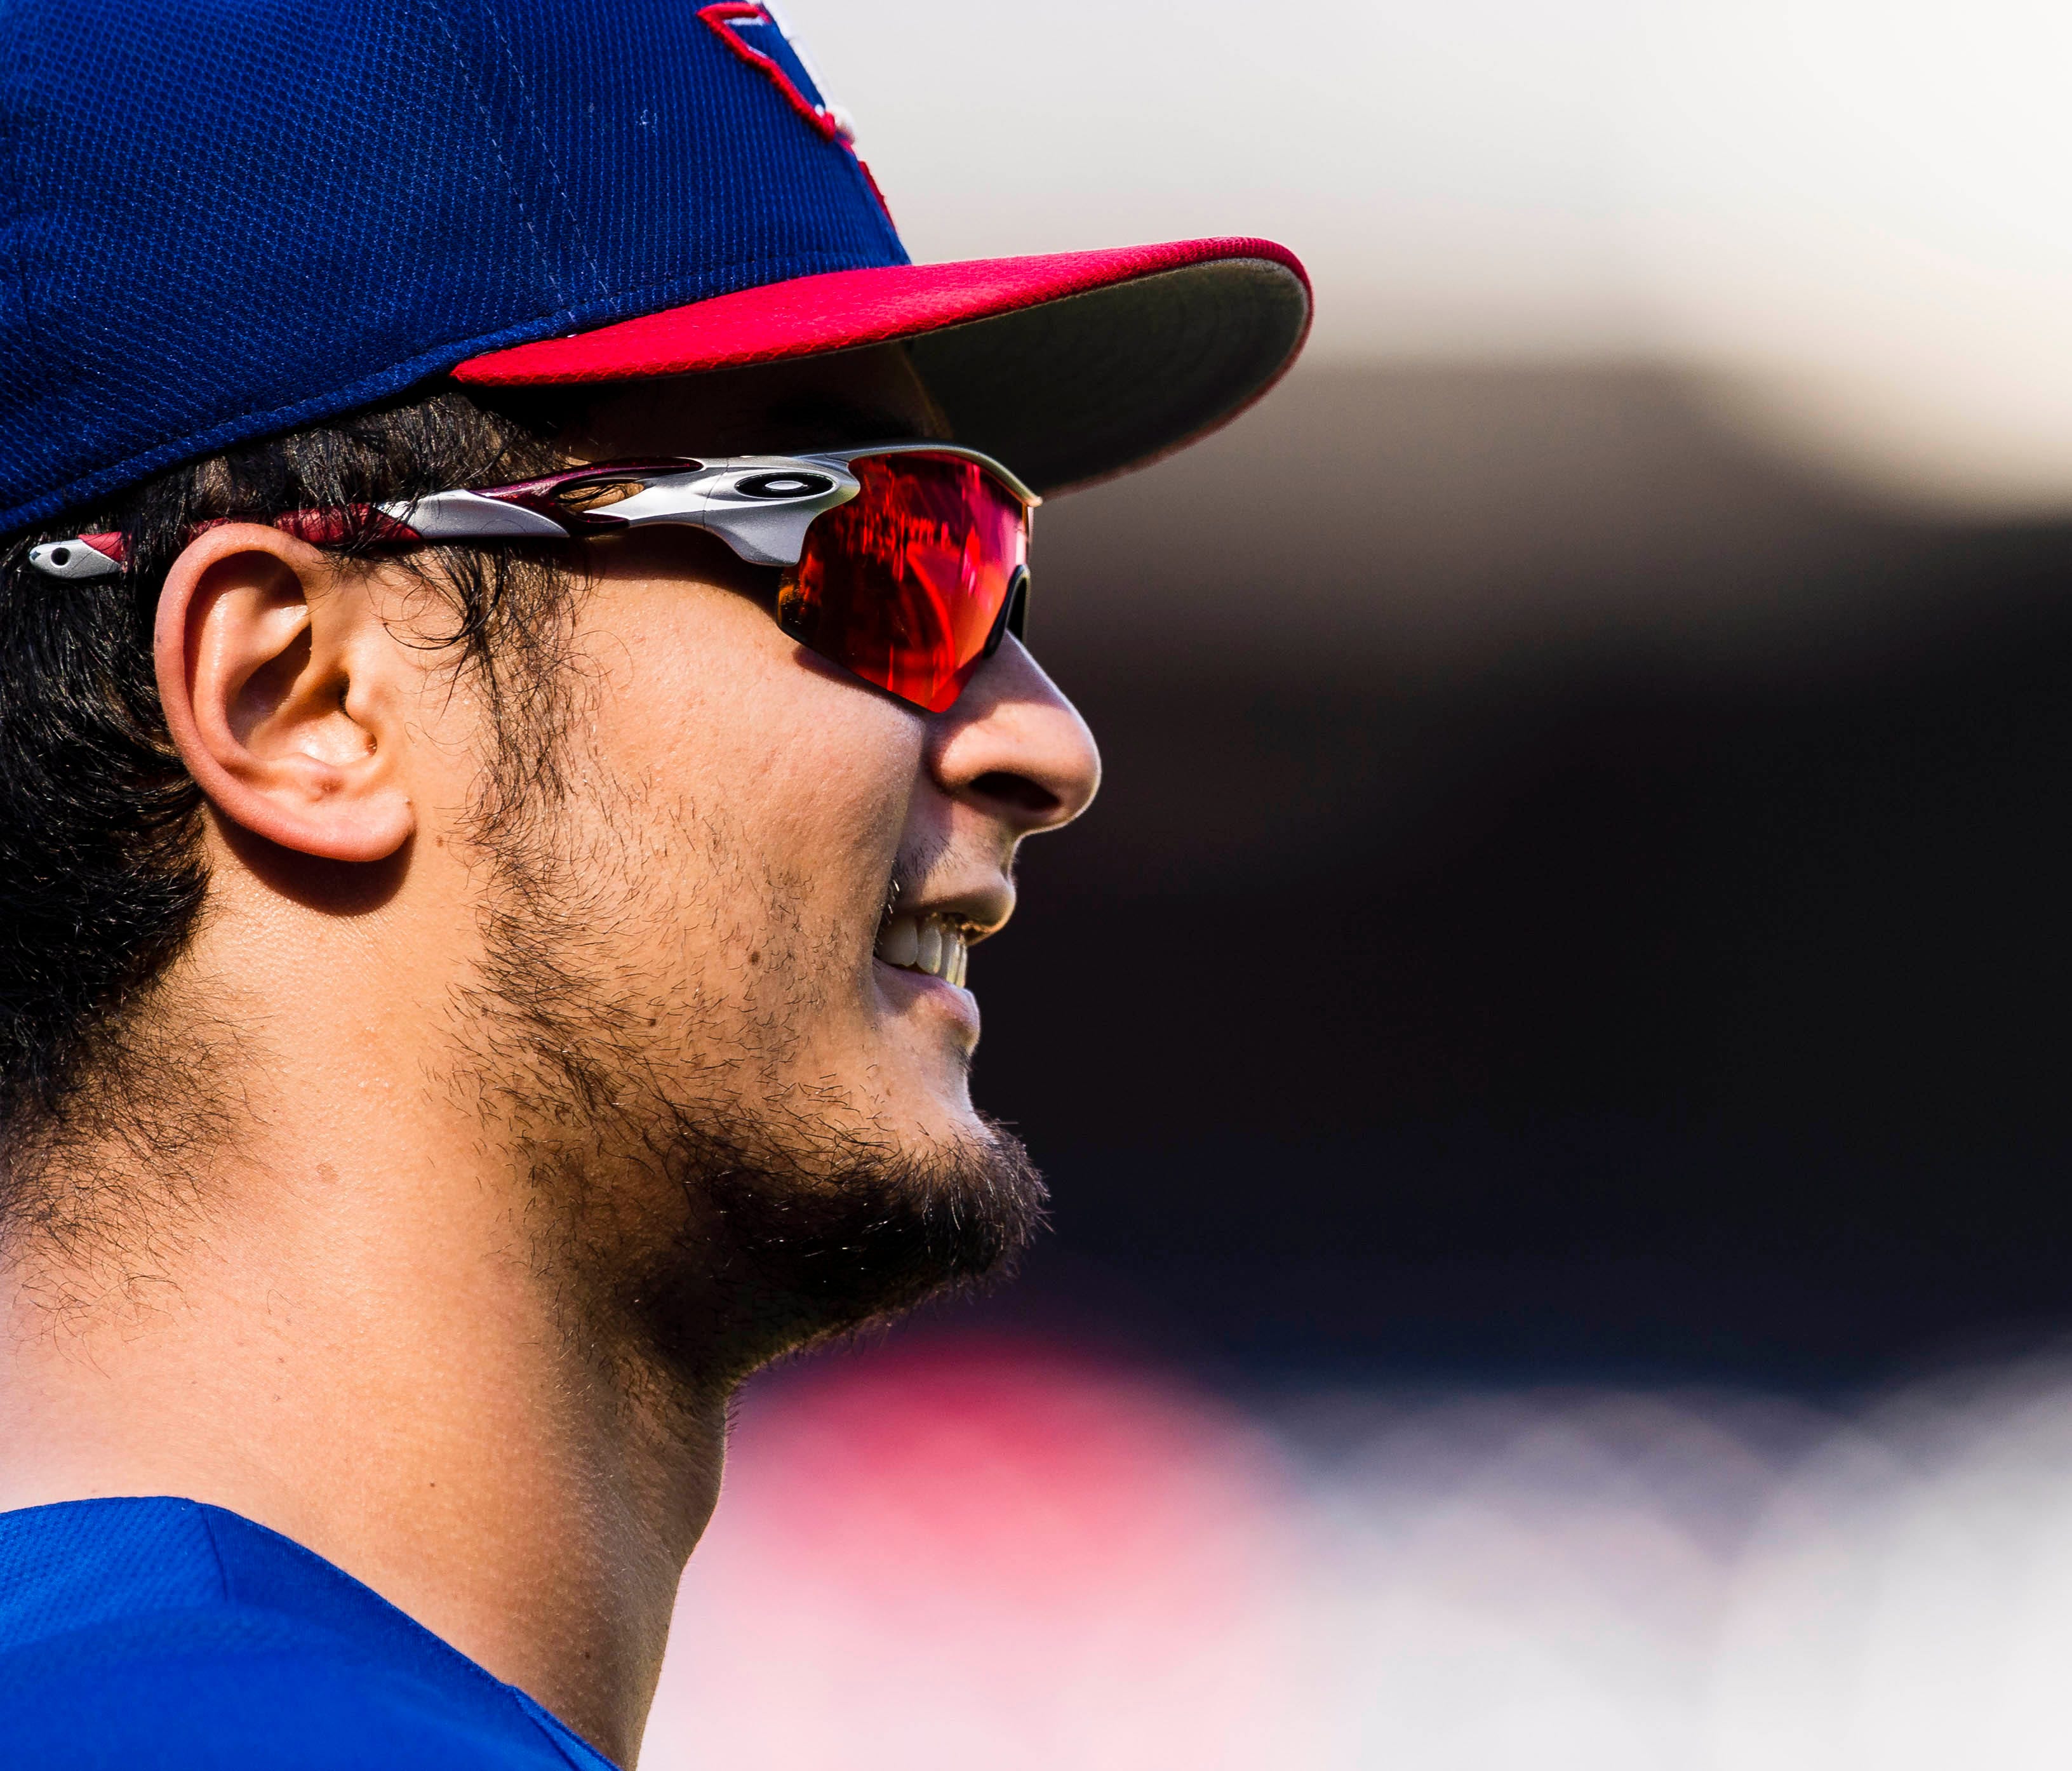 The Rangers hope to re-sign Yu Darvish when he becomes a free agent - whether they make the playoffs or not this season.